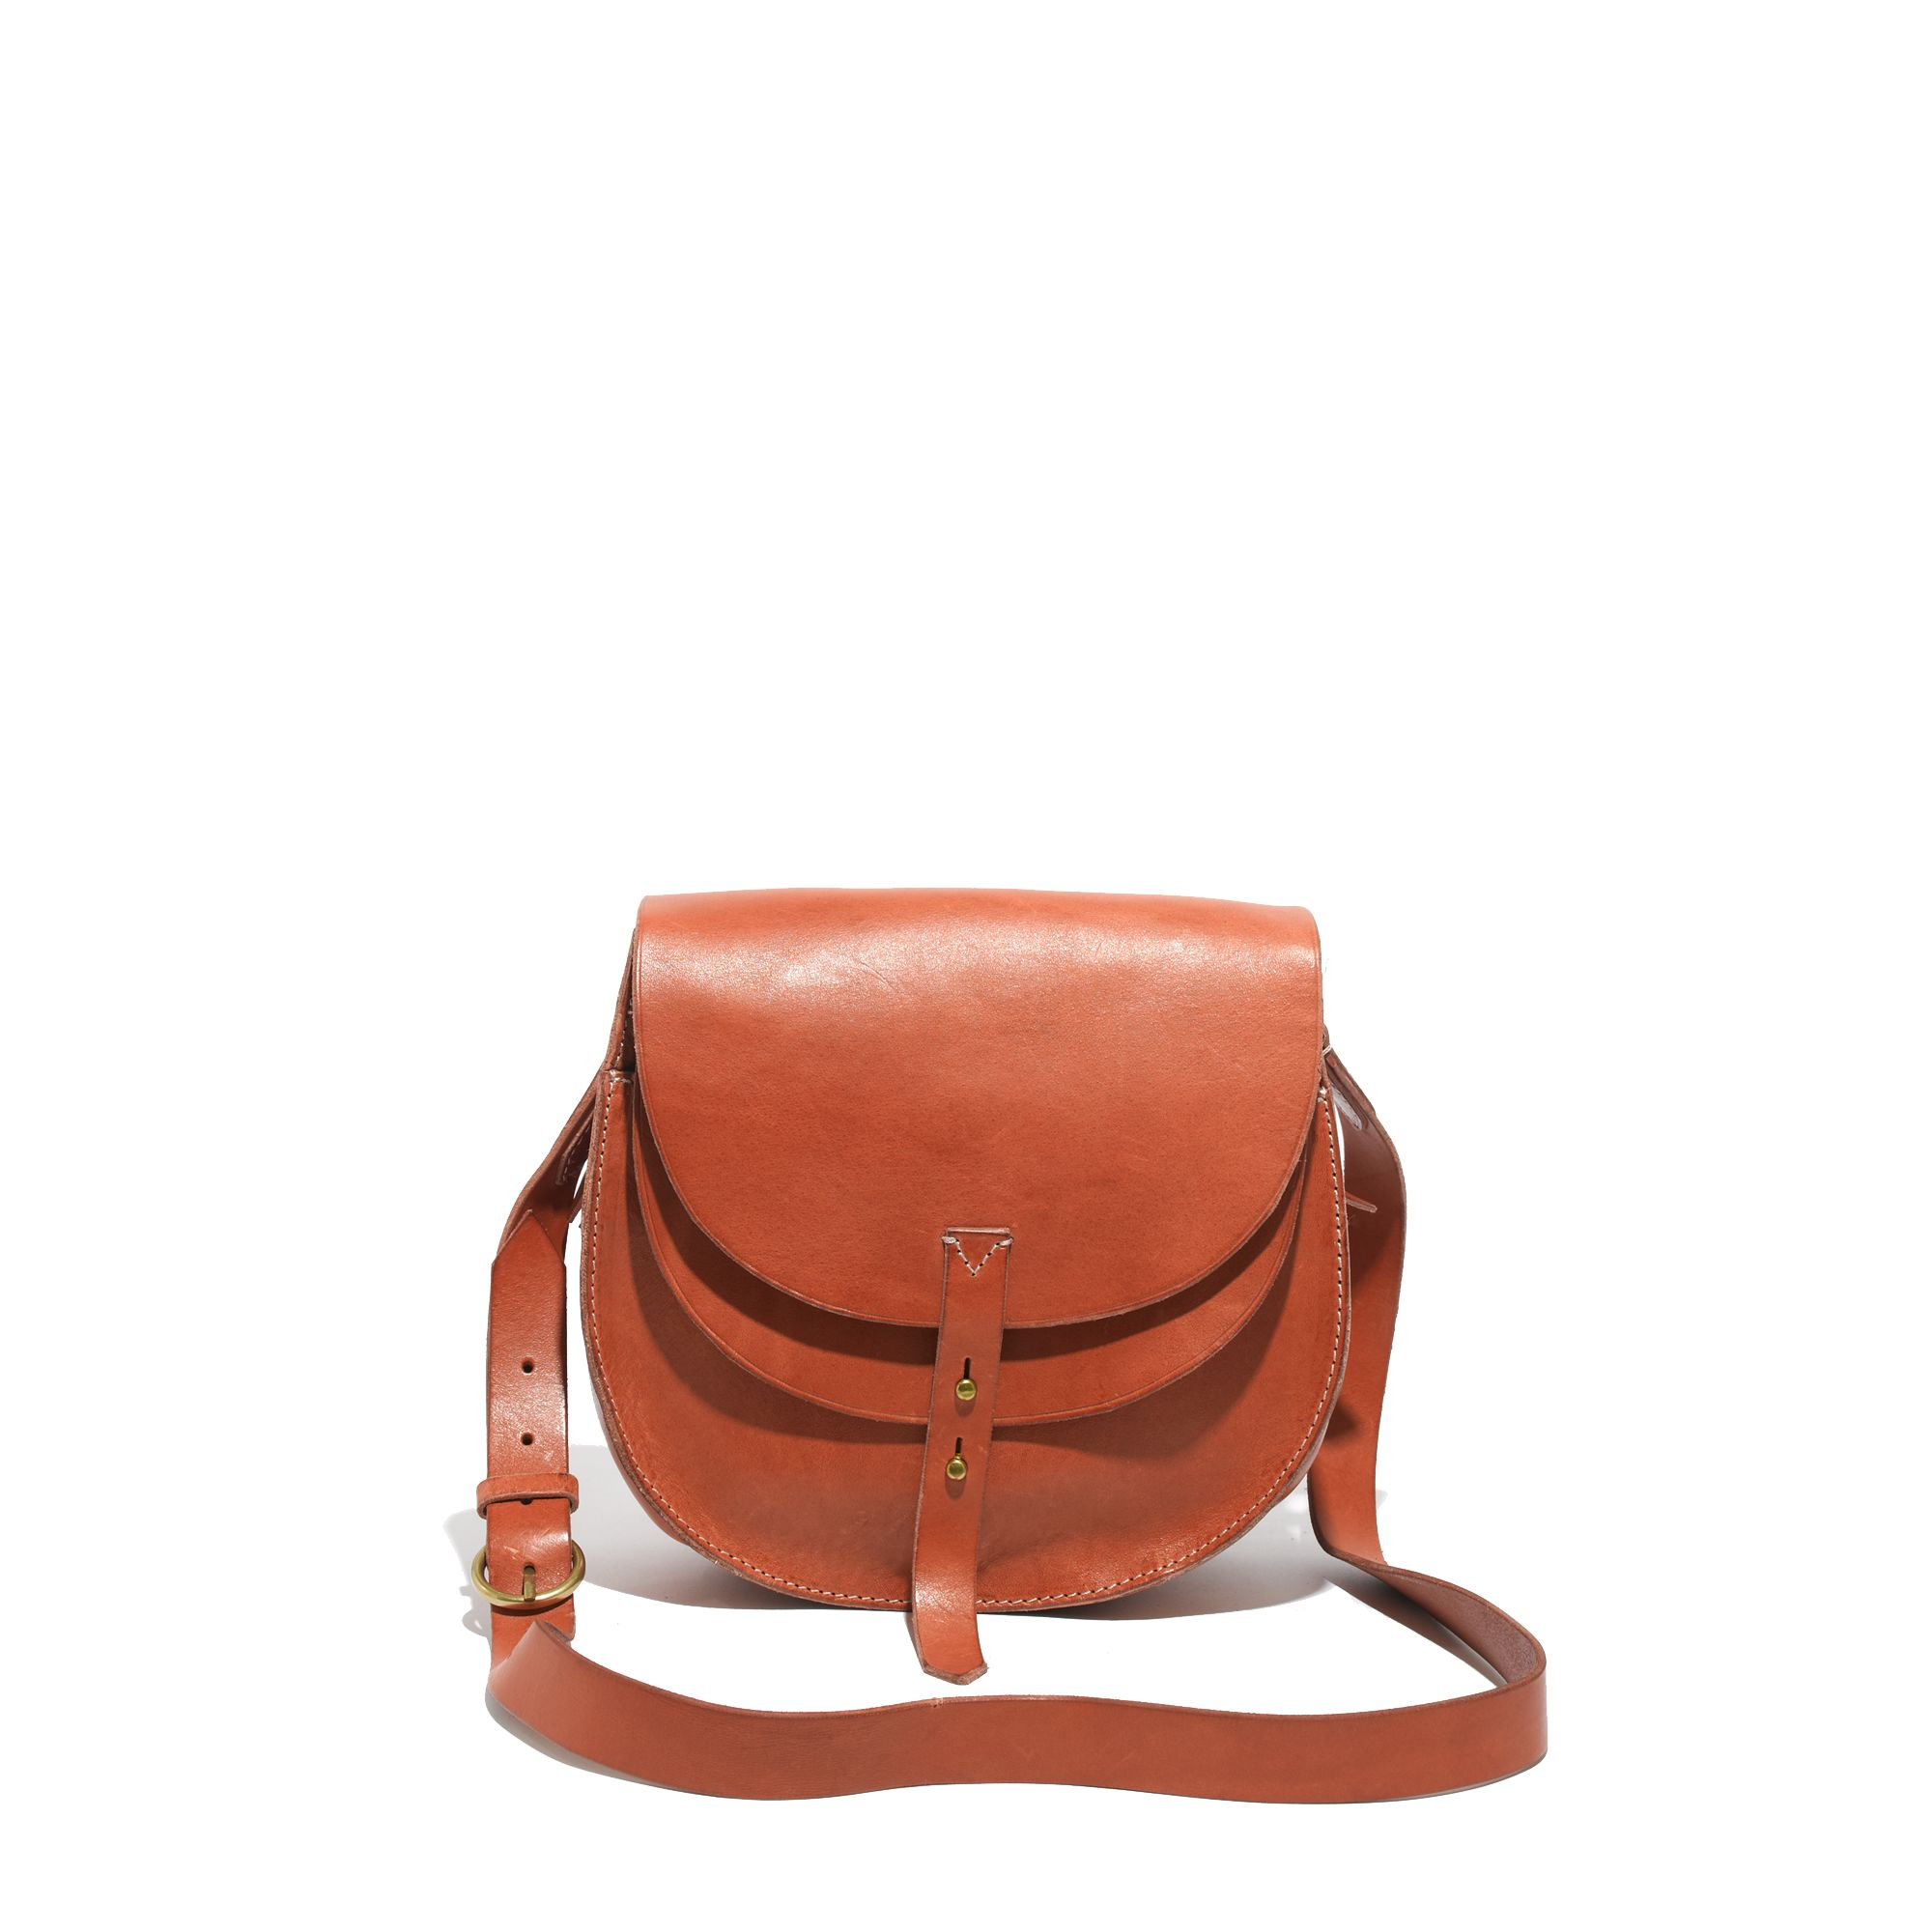 Madewell bags. Madewell Women's The Essential Mini Bucket Tote in Suede